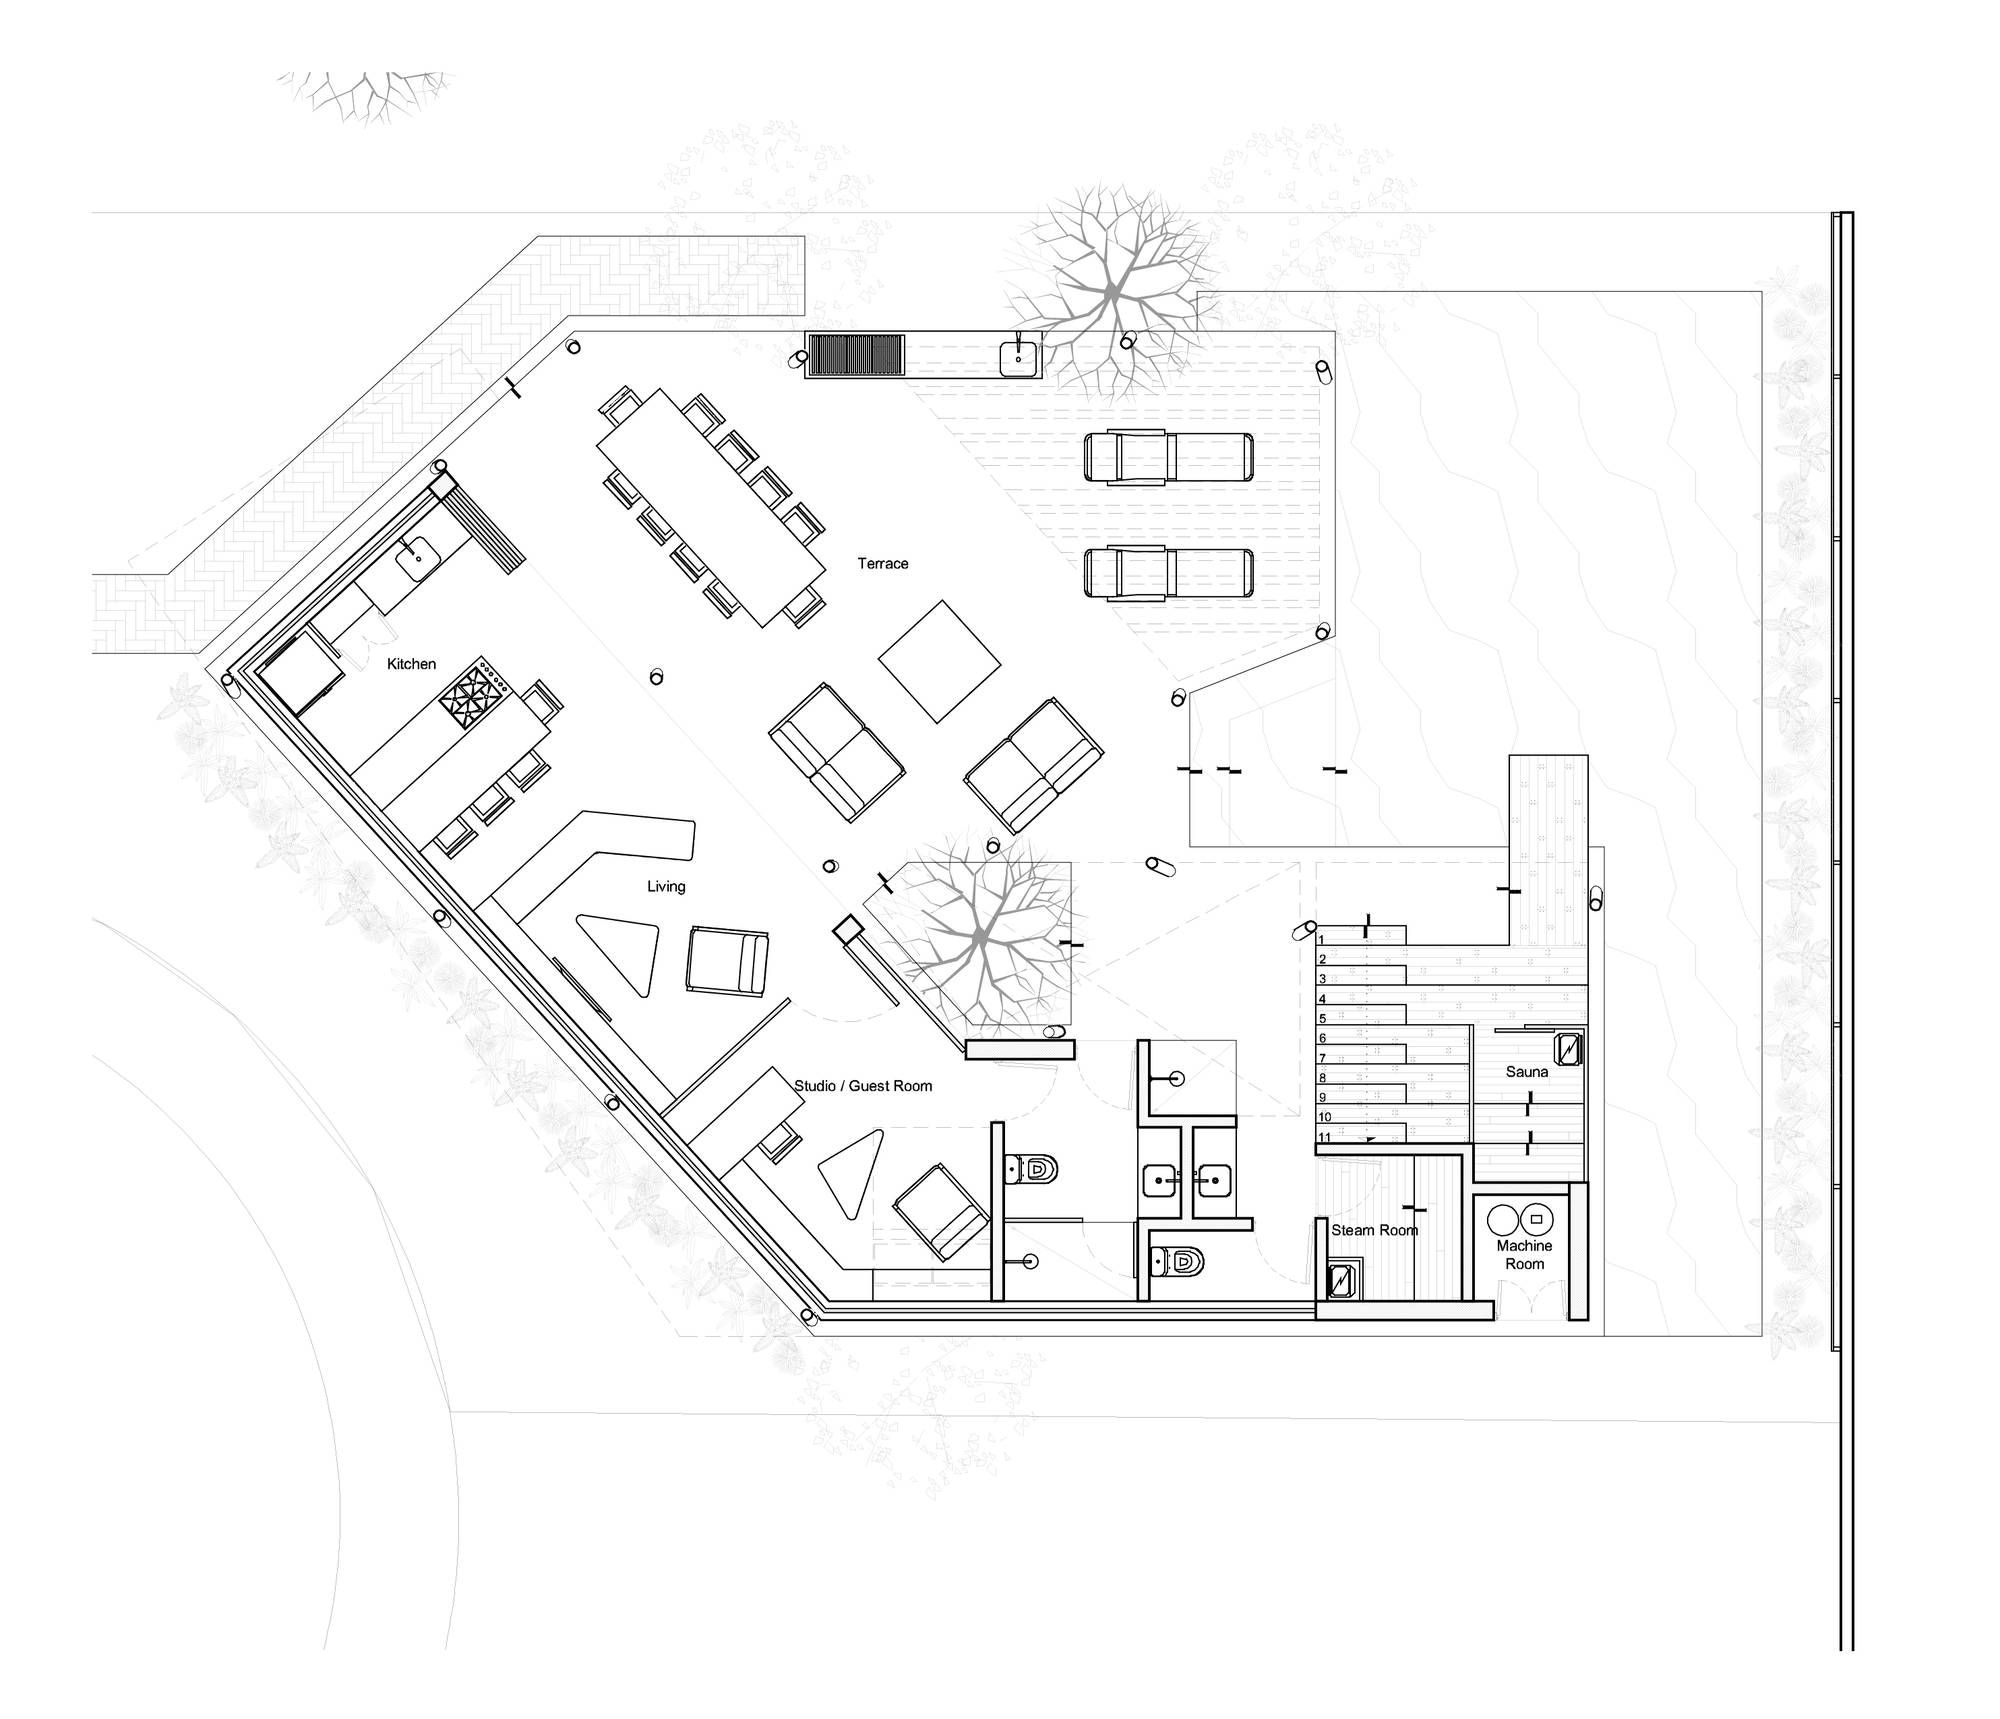 Ground level floor plan of Barrenechea House Extension designed by Cafeina Design in Santa Cruc, Bolivia